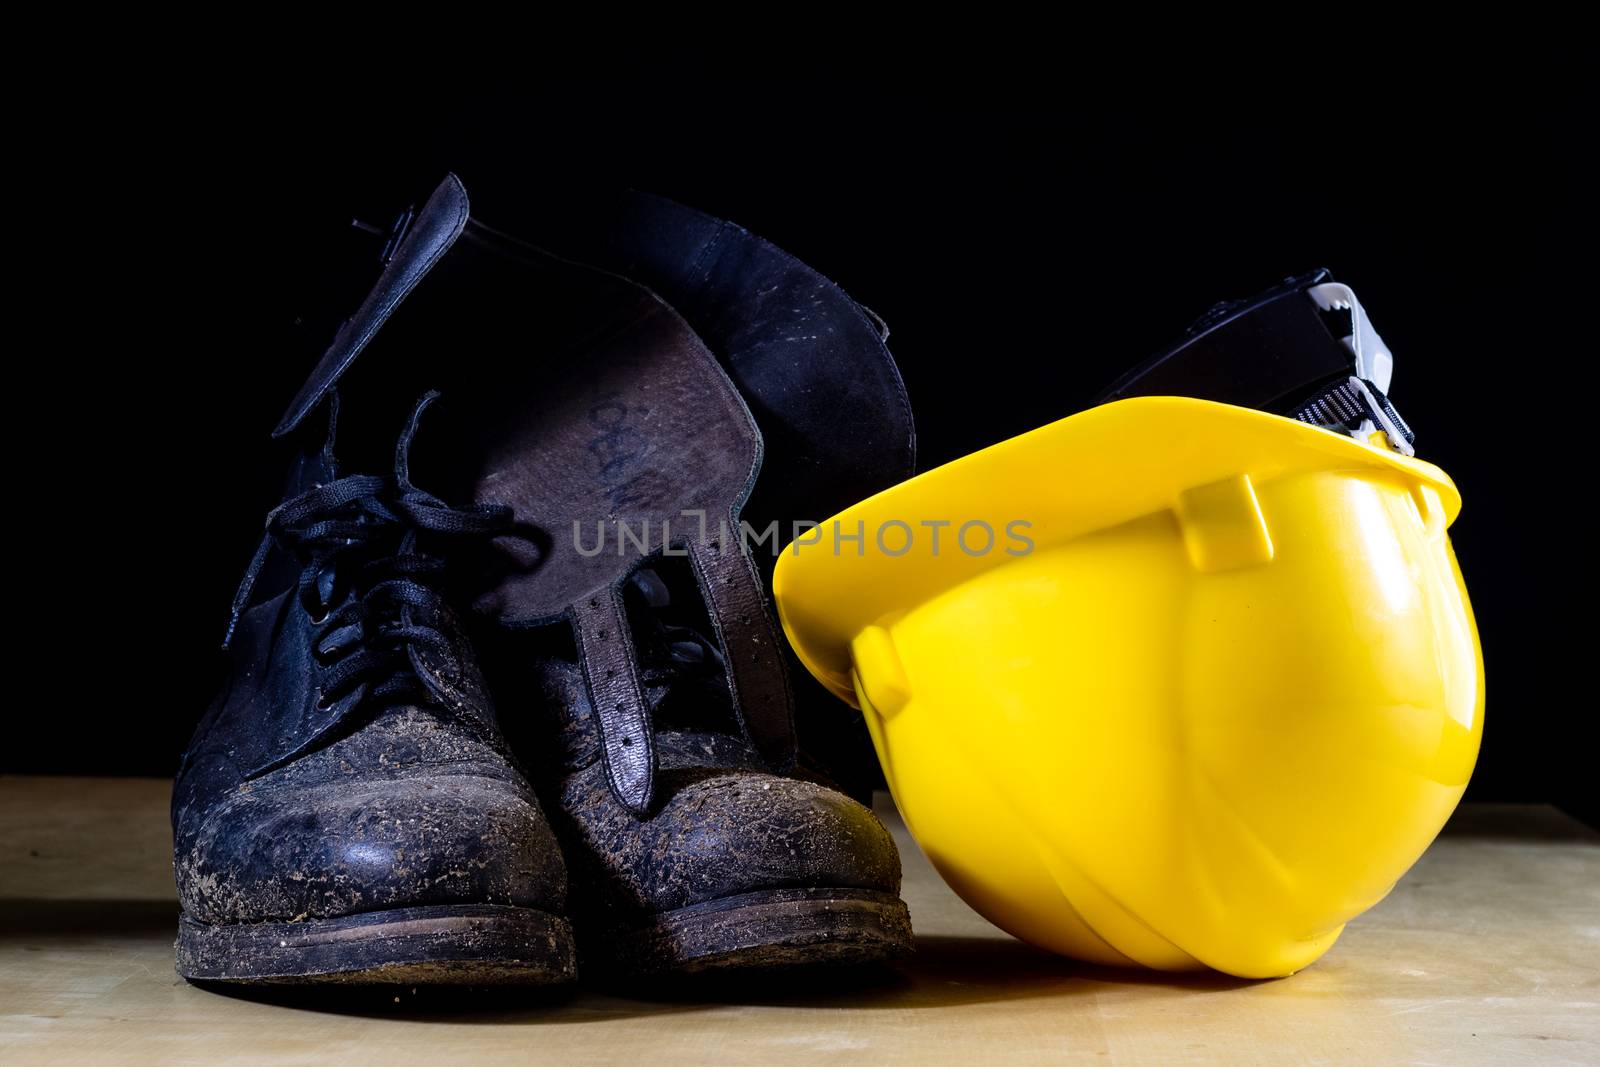 Muddy working boots with helmet and gloves. Accessories for the worker. Black background.